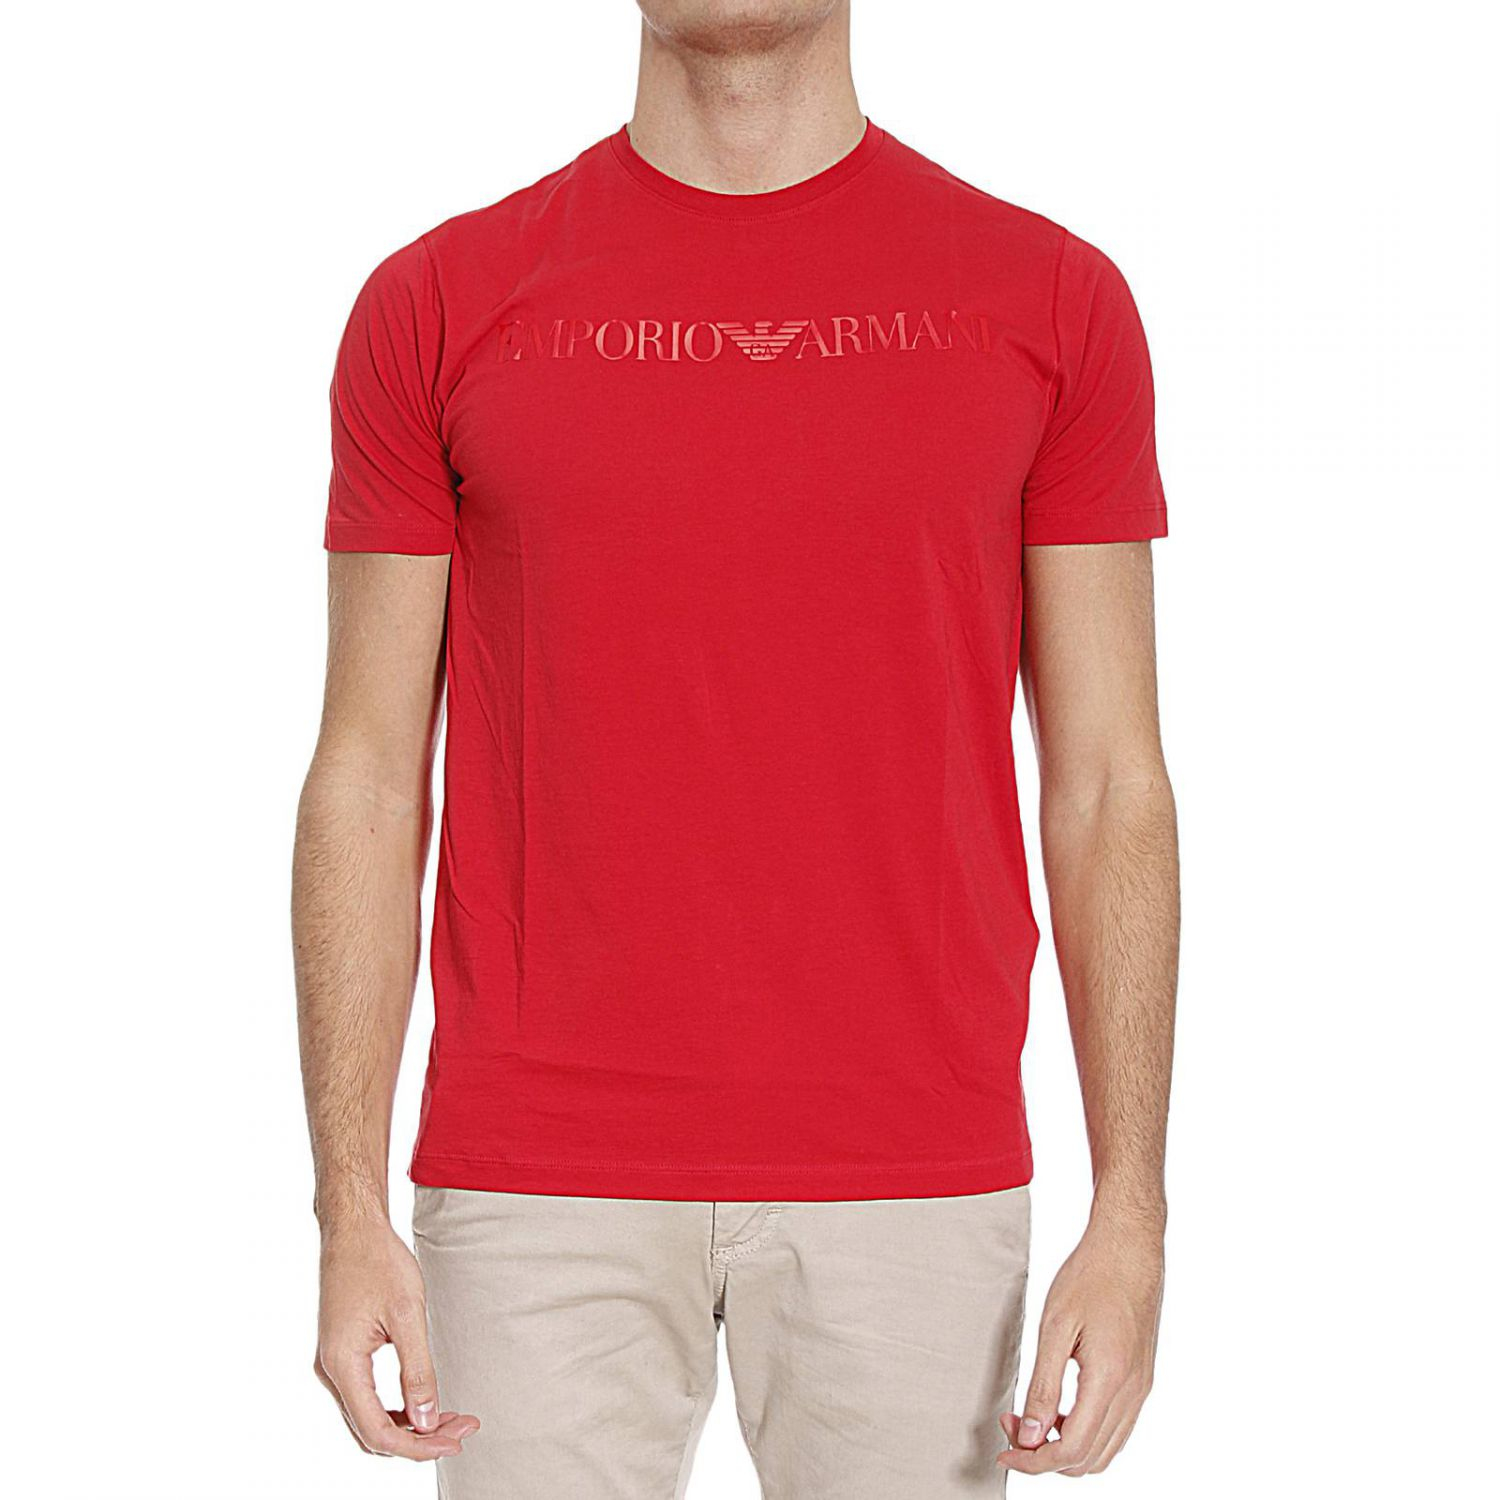 Lyst - Emporio Armani T-shirt in Red for Men